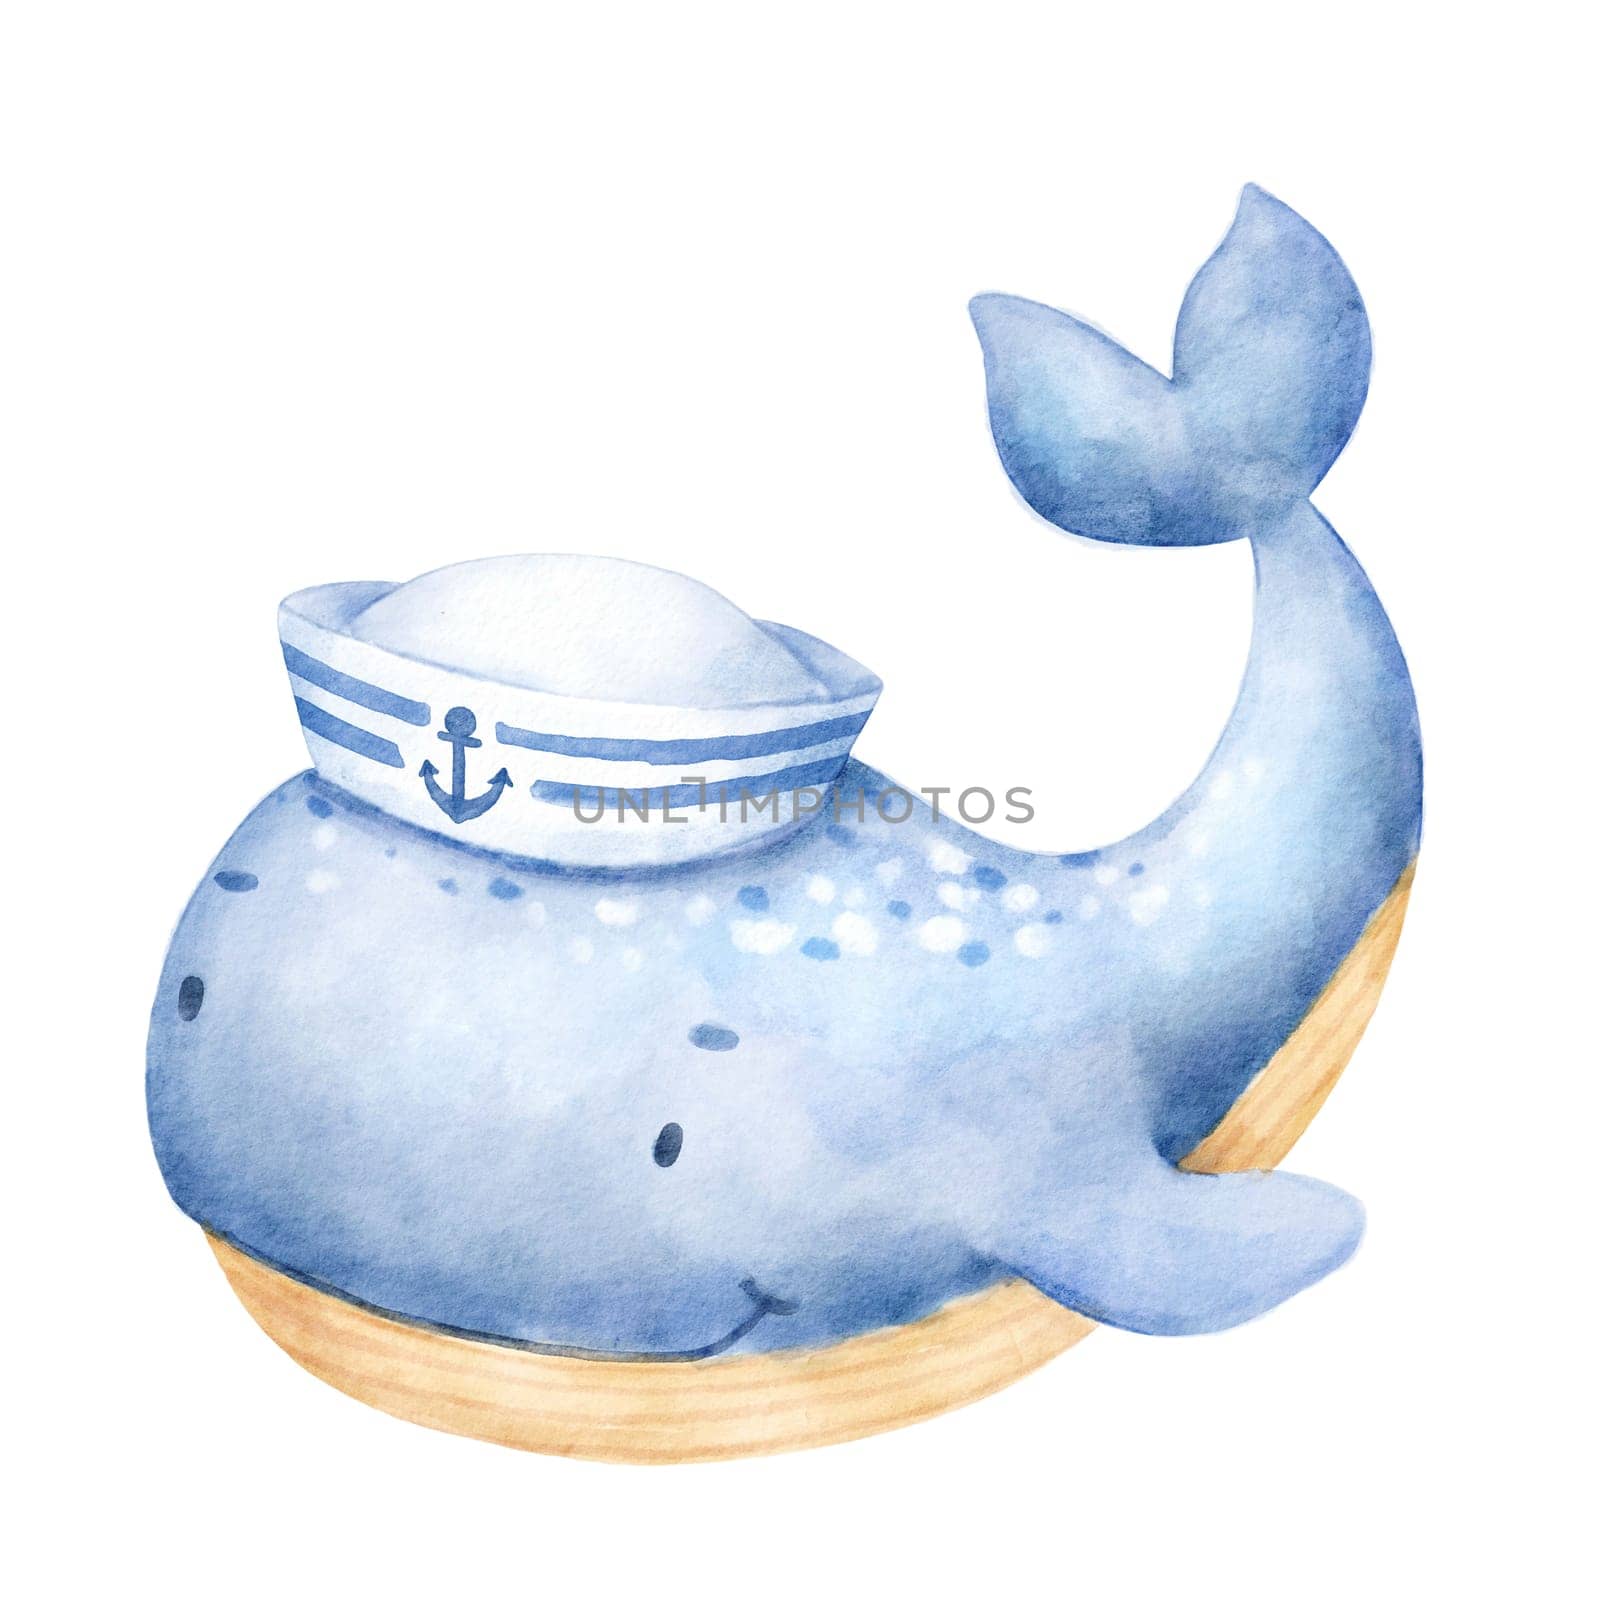 Cute watercolor whale character isolated on white. Hand drawn nautical illustration by ElenaPlatova